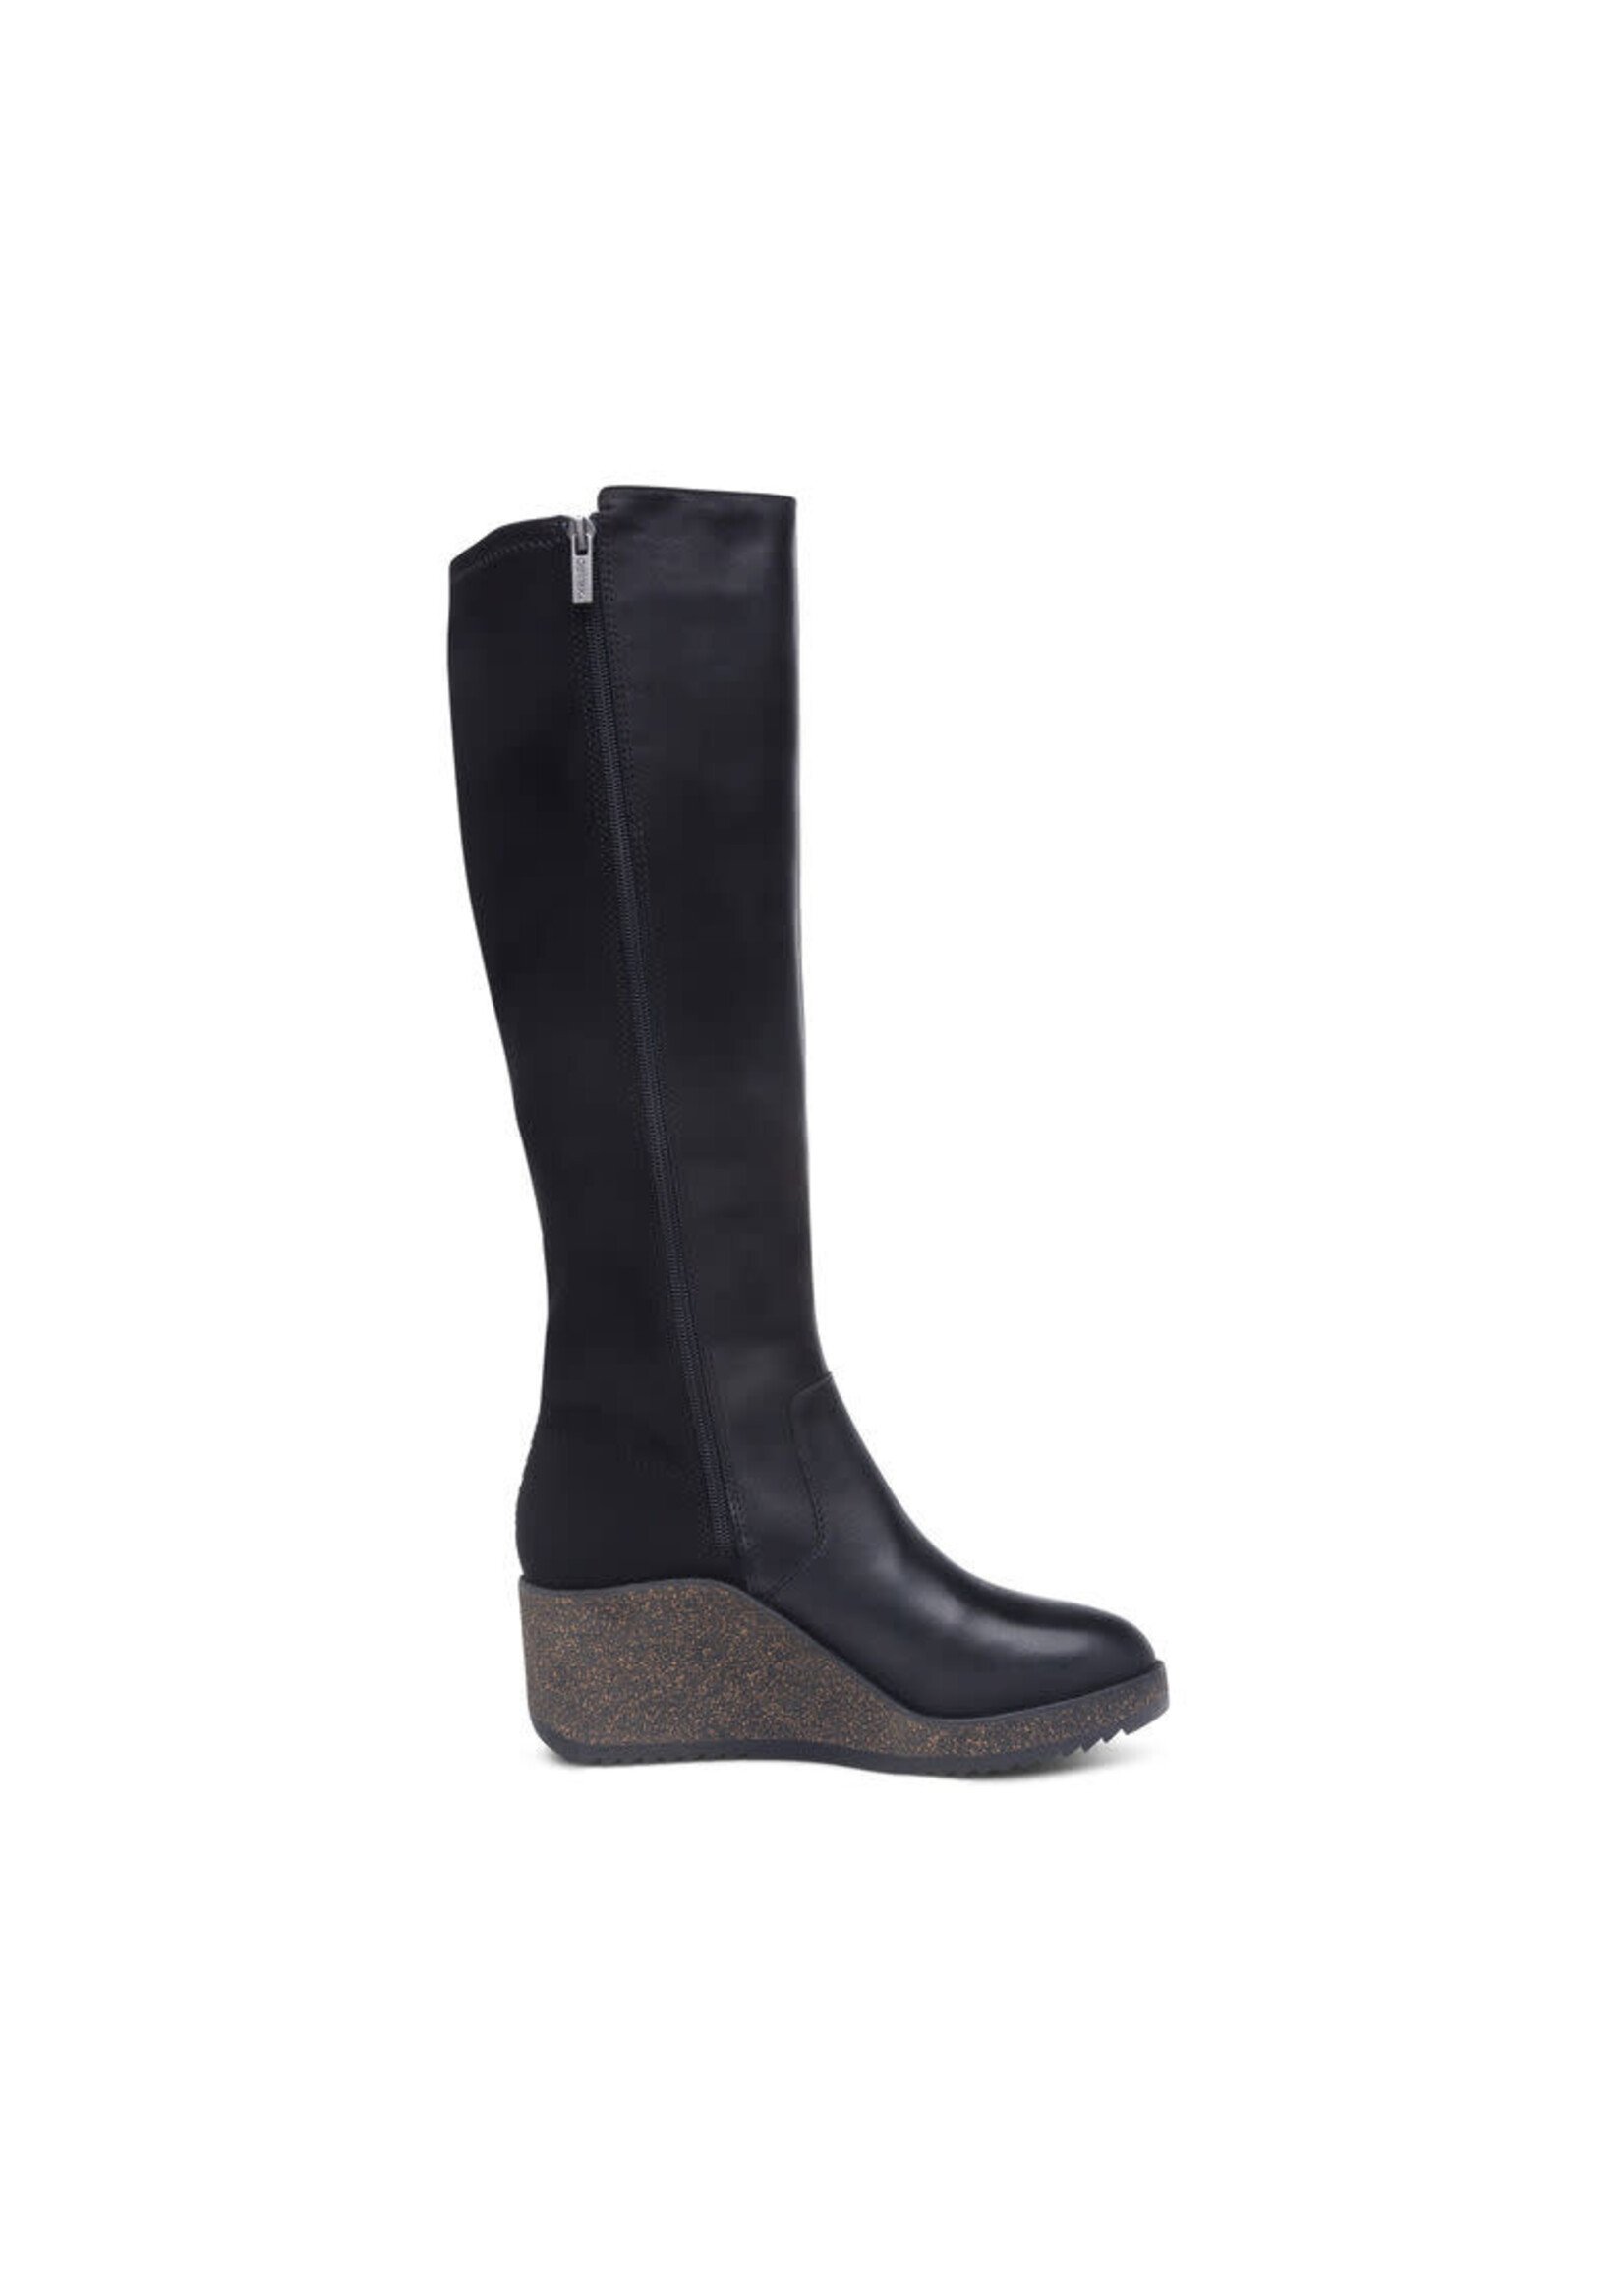 Rose Black LeatherTall Boot By Aetrex Size 40   Us 9 -9.5  25% Off